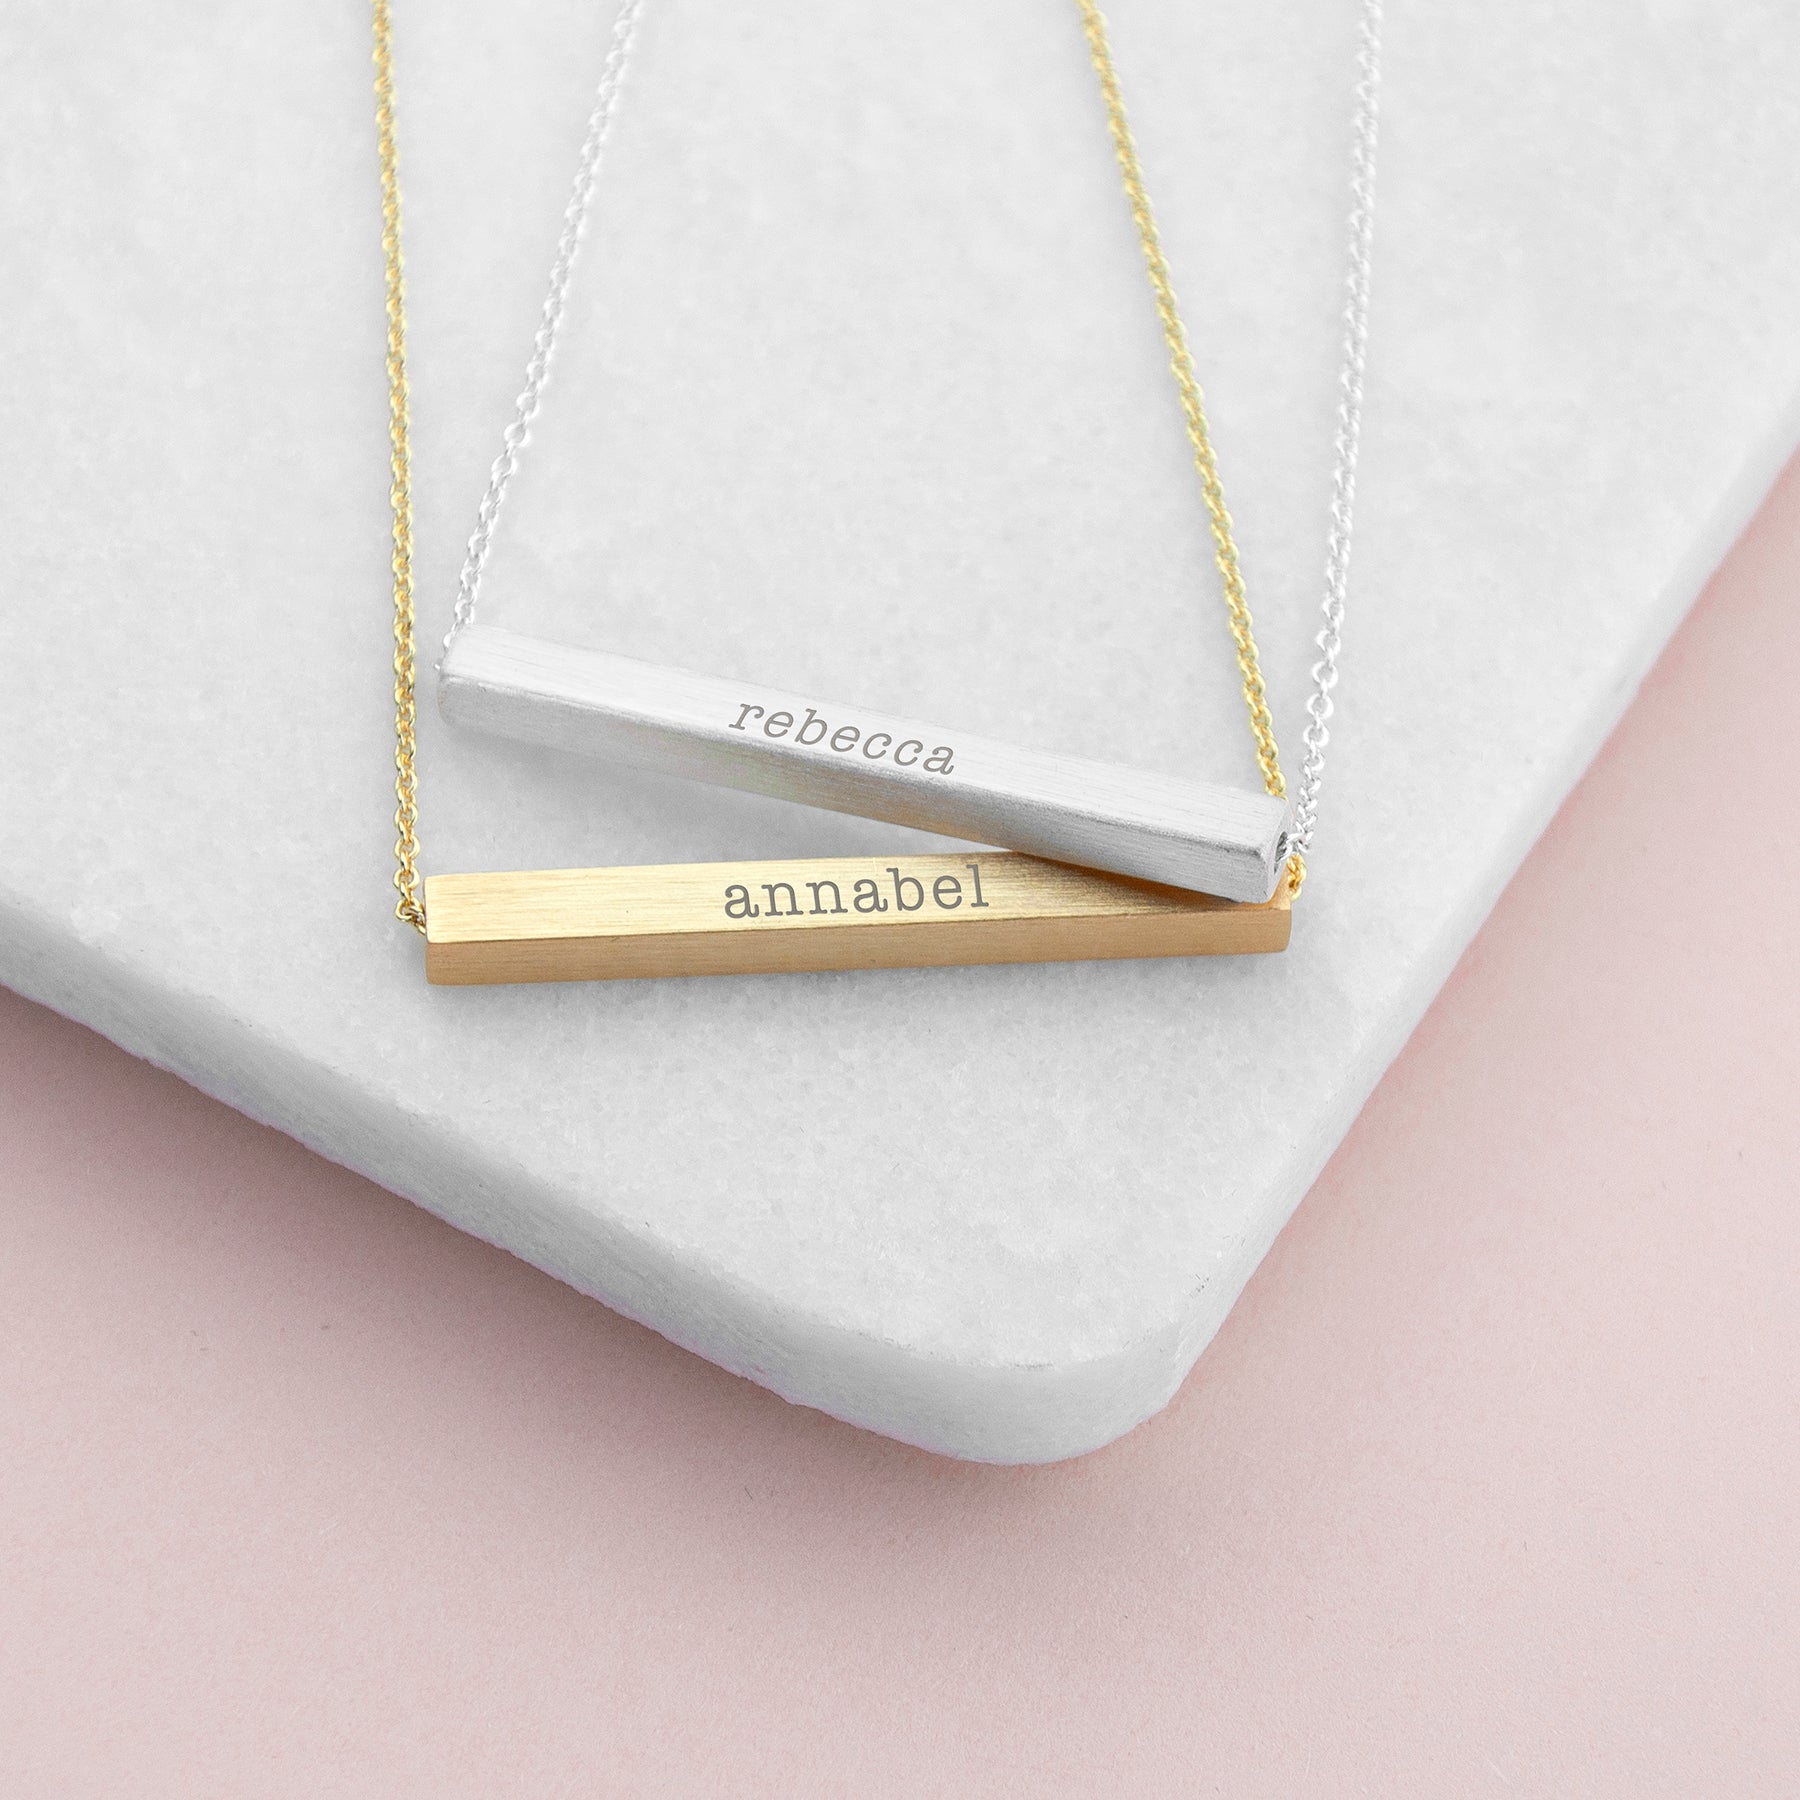 Personalized Necklaces - Personalized Horizontal Bar Necklace 